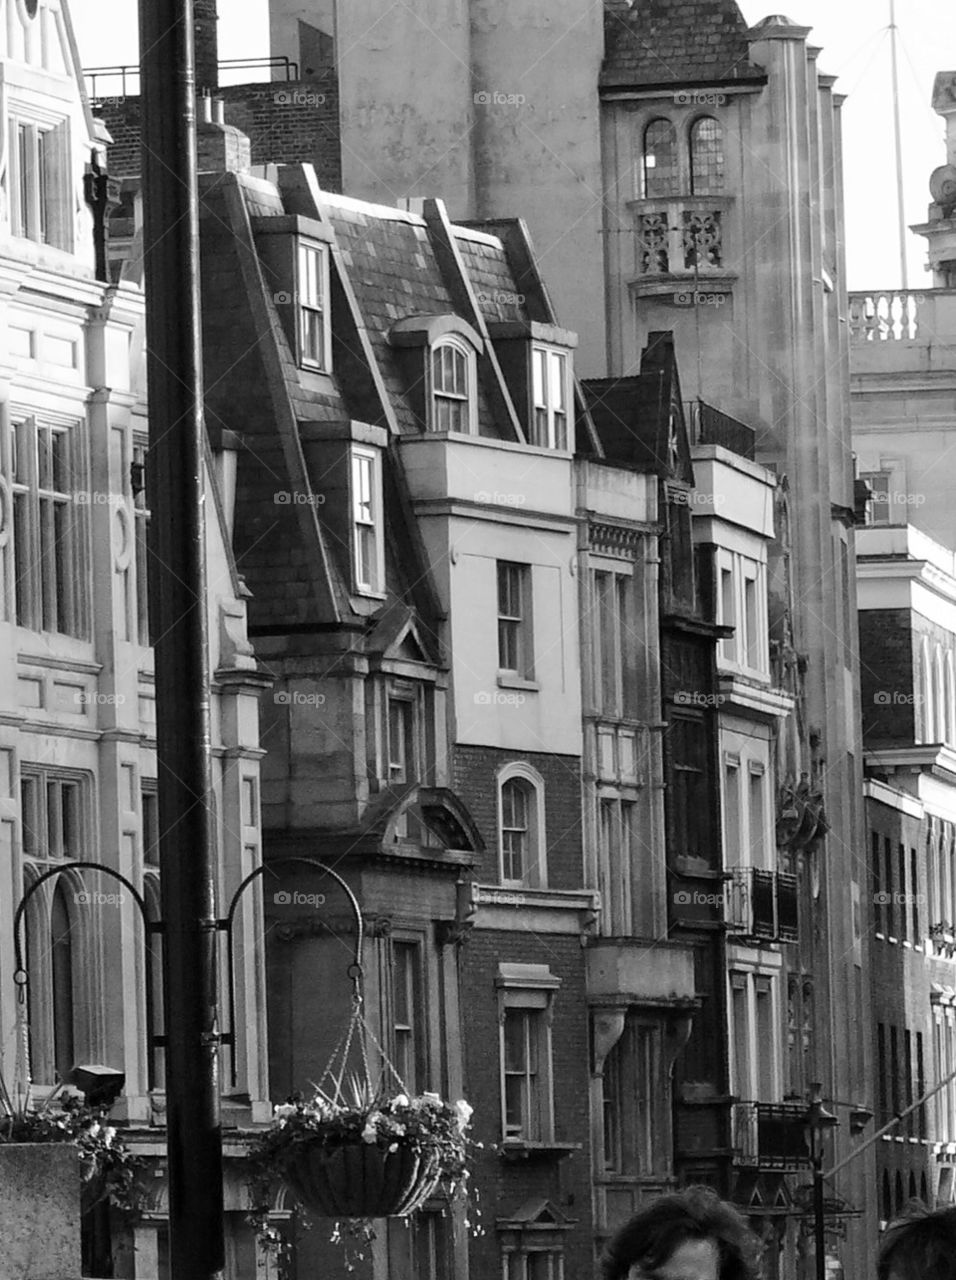 Old buildings in London. View of London street structures